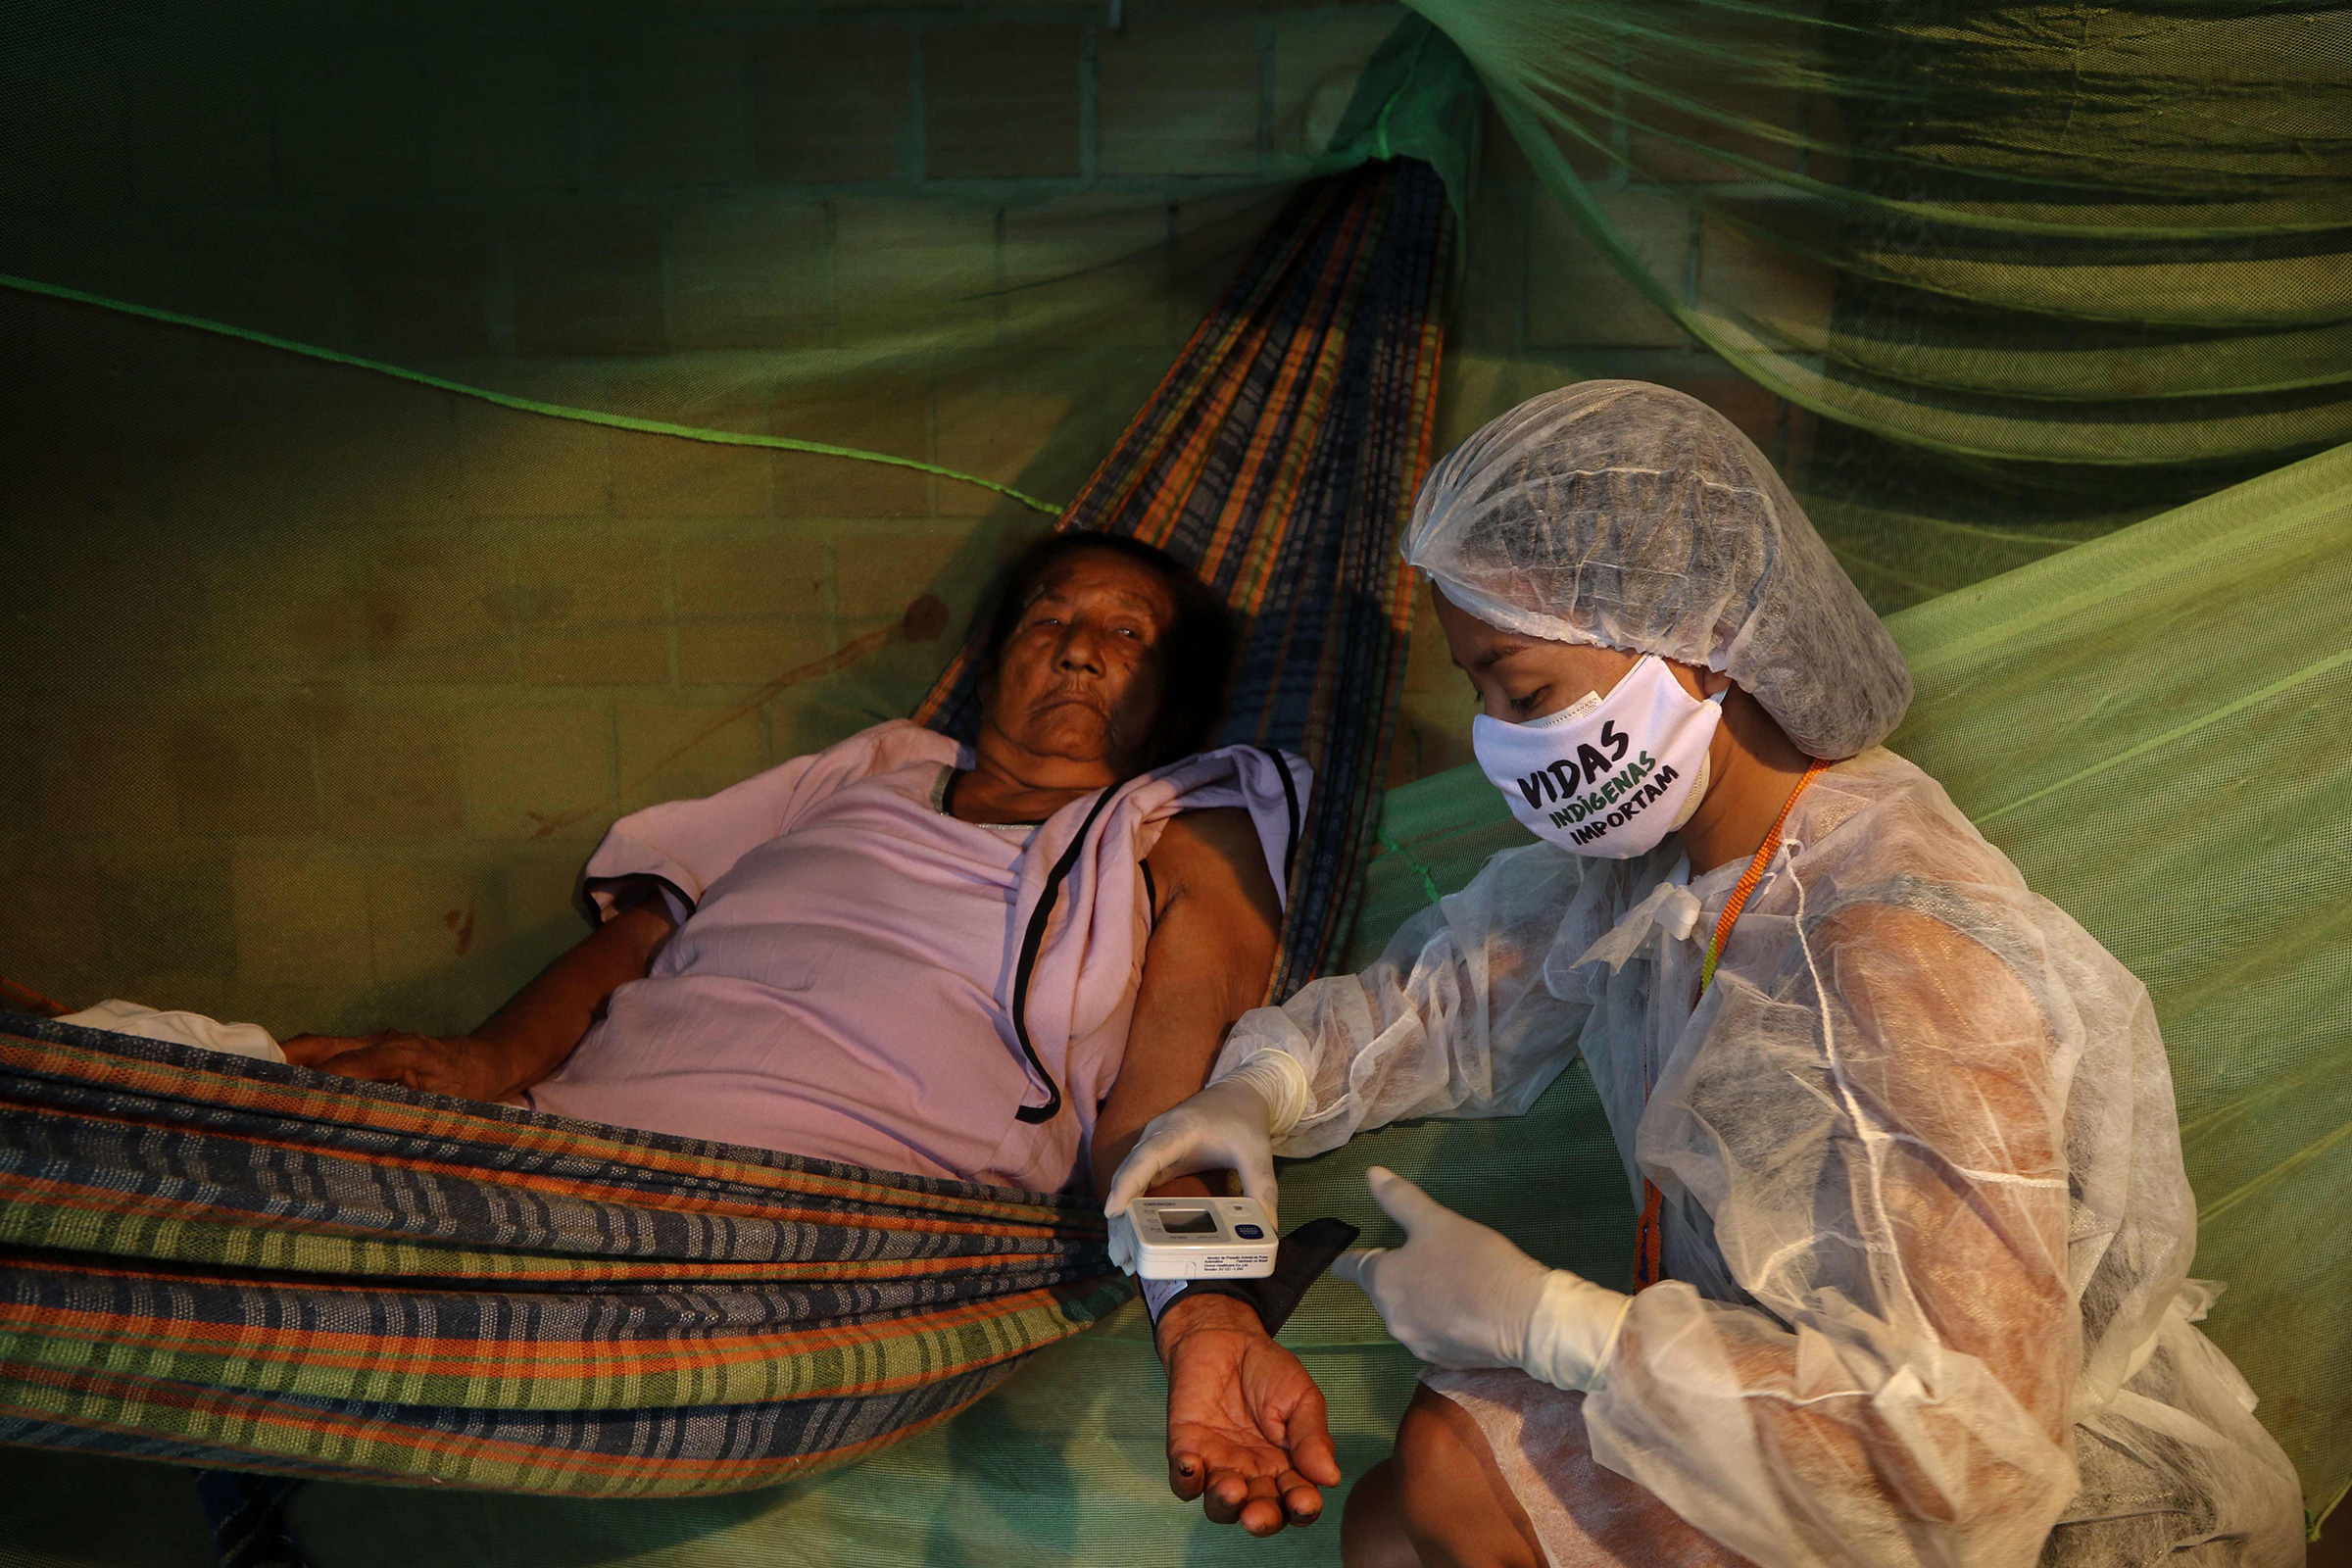 Nurse technician Vanda Ortega Witoto, 32, takes care of a patient in Parque das Tribos, an indigenous community near Manaus, the capital of Brazil’s northern Amazonas state